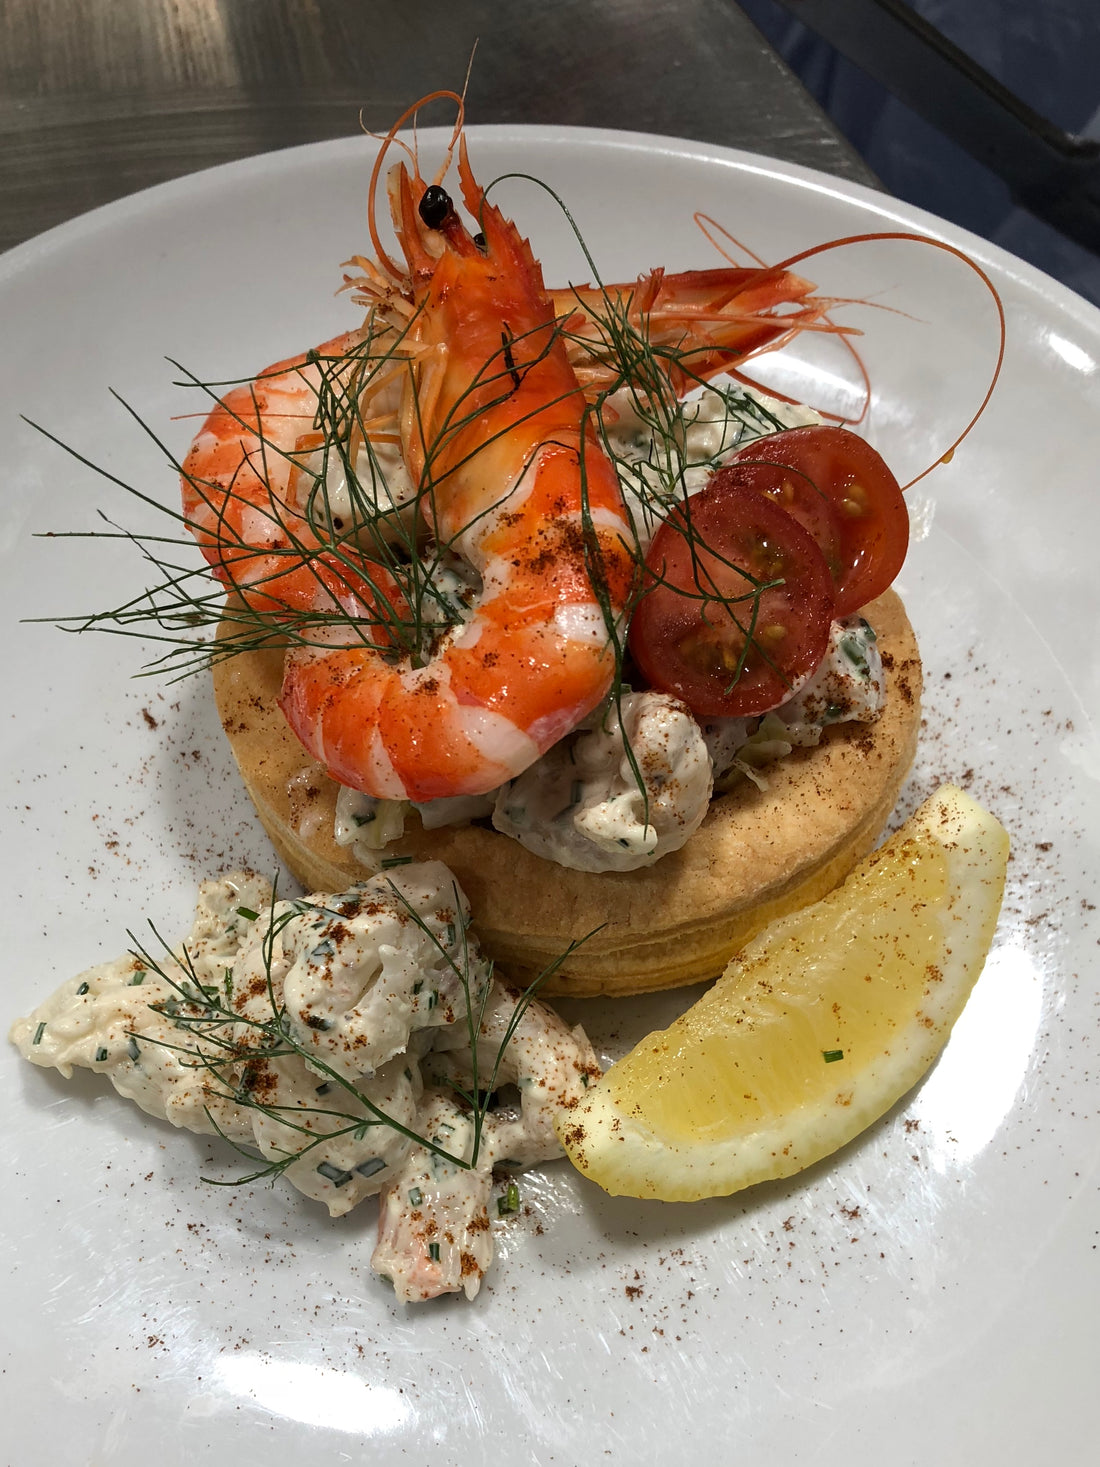 Lobster and Prawn Cocktail Vol au Vent